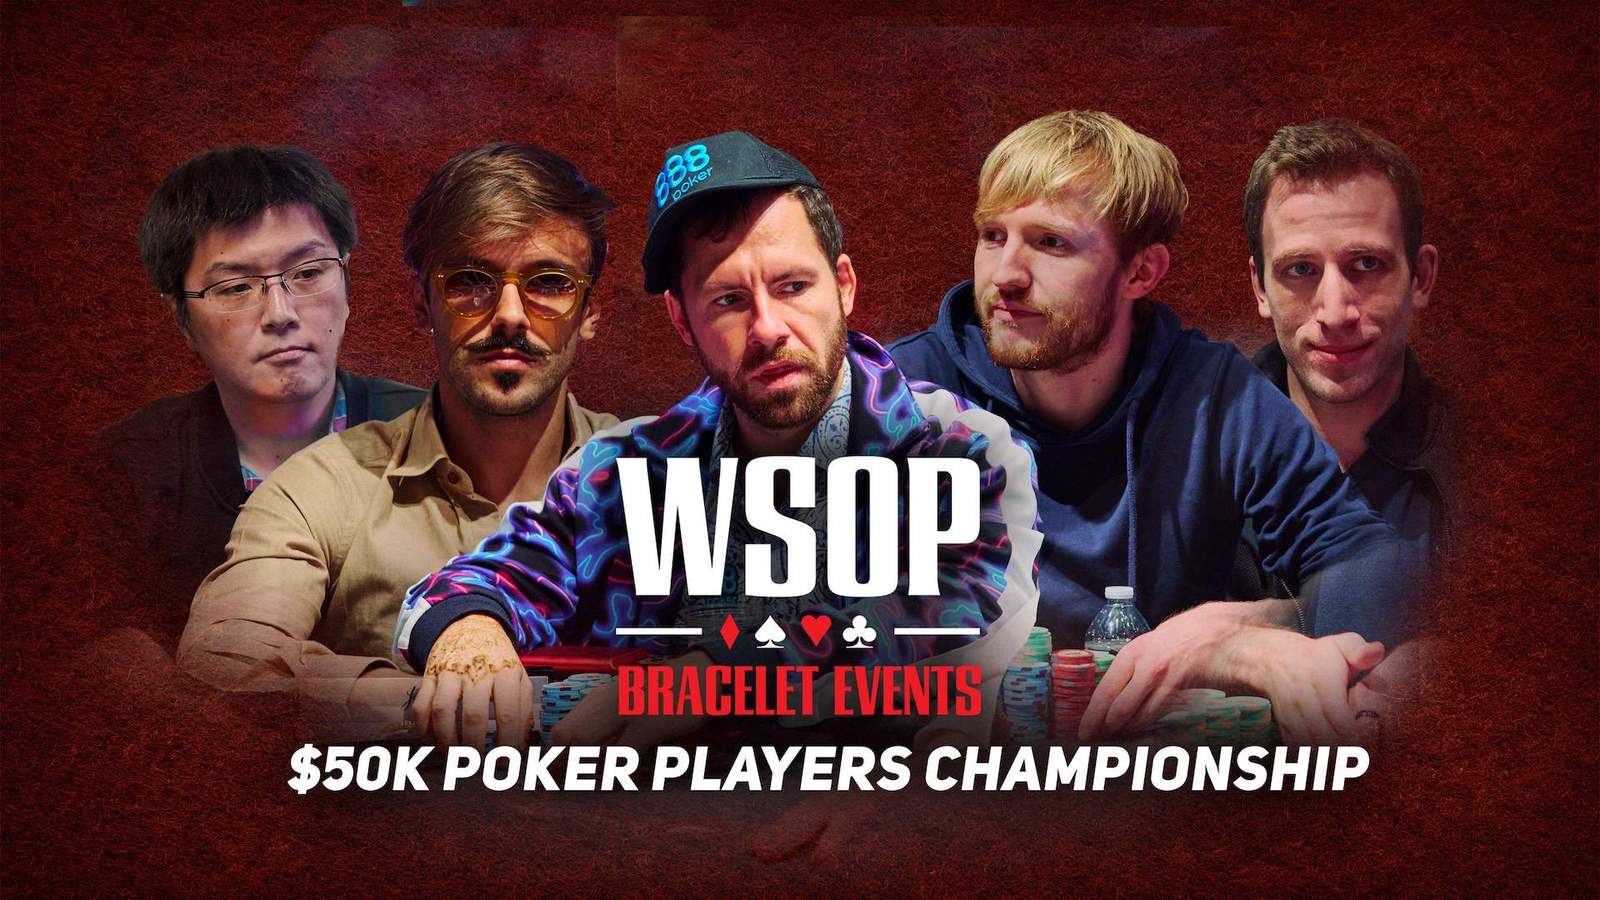 Watch the WSOP Event #56: $50K Poker Players Championship Final Table on PokerGO.com at 8 p.m. ET